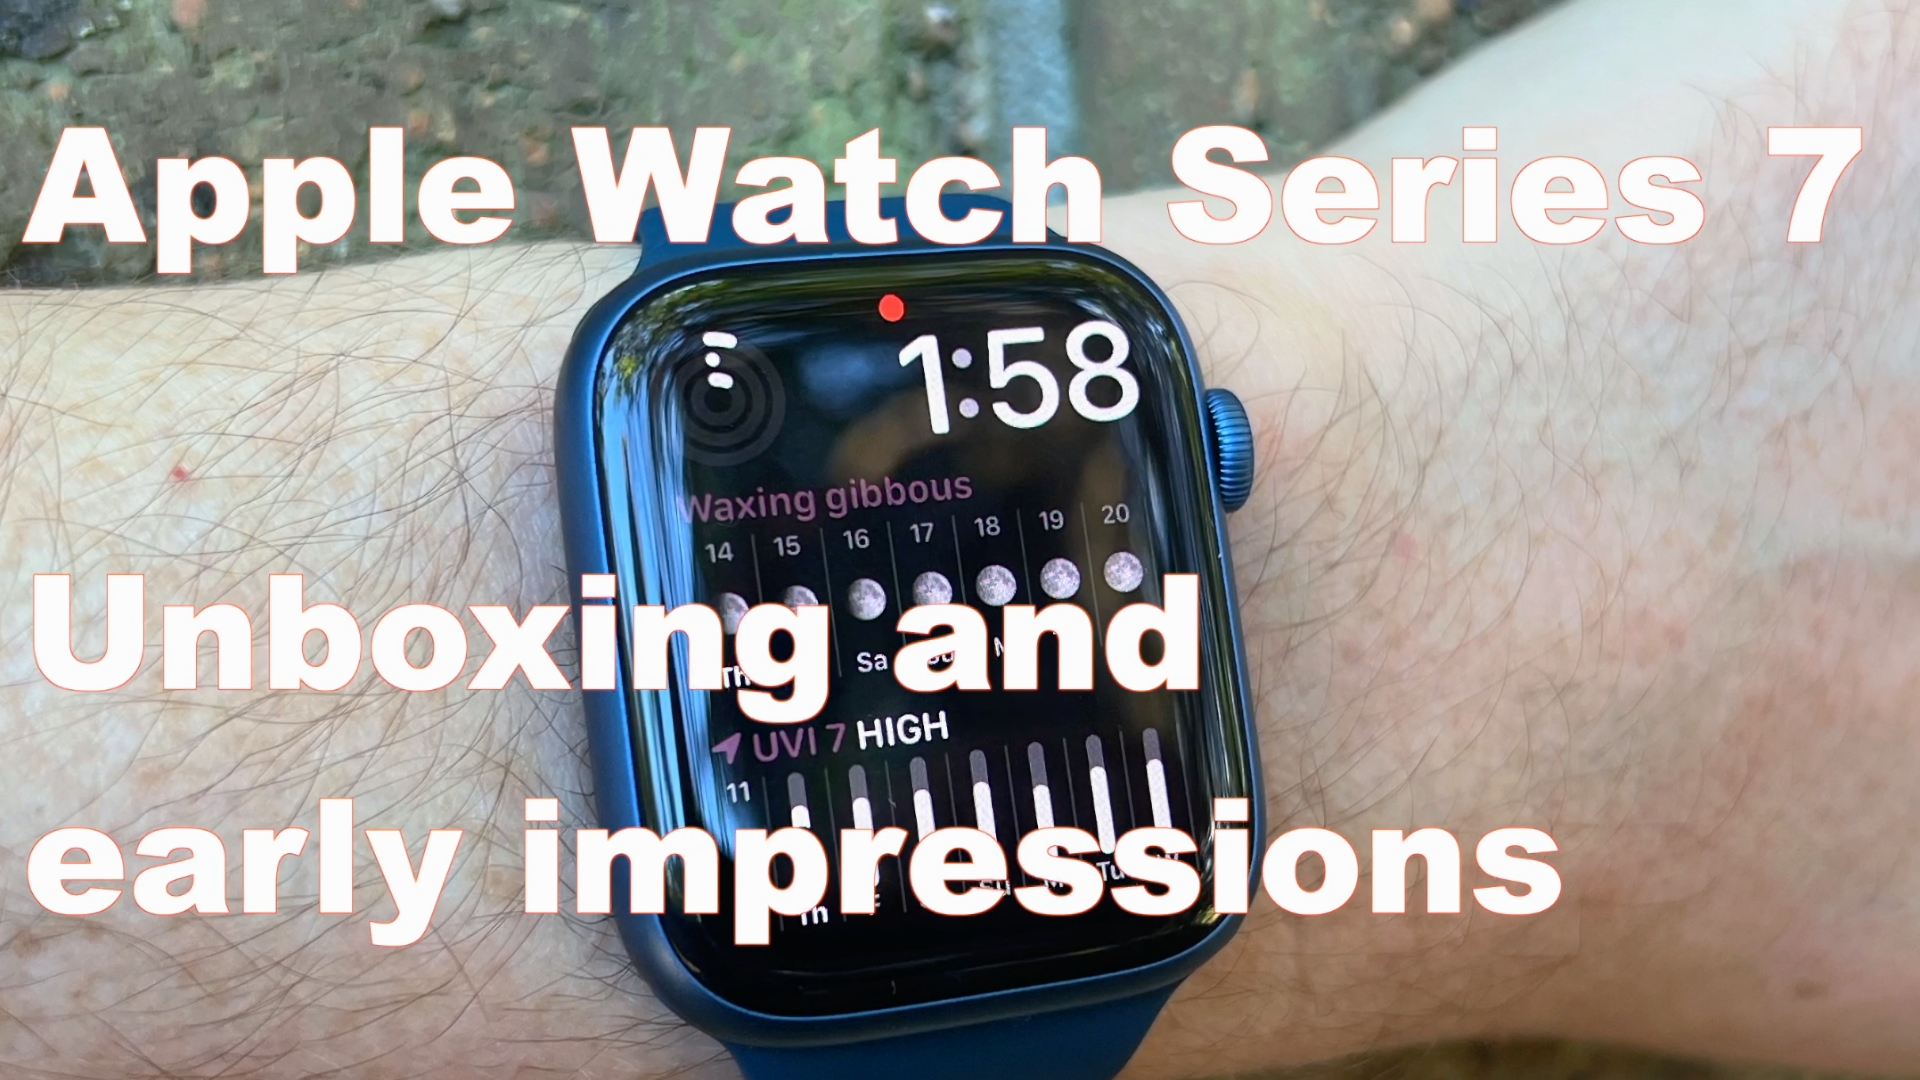 Video: Apple Watch Series 7: Unboxing and early impressions